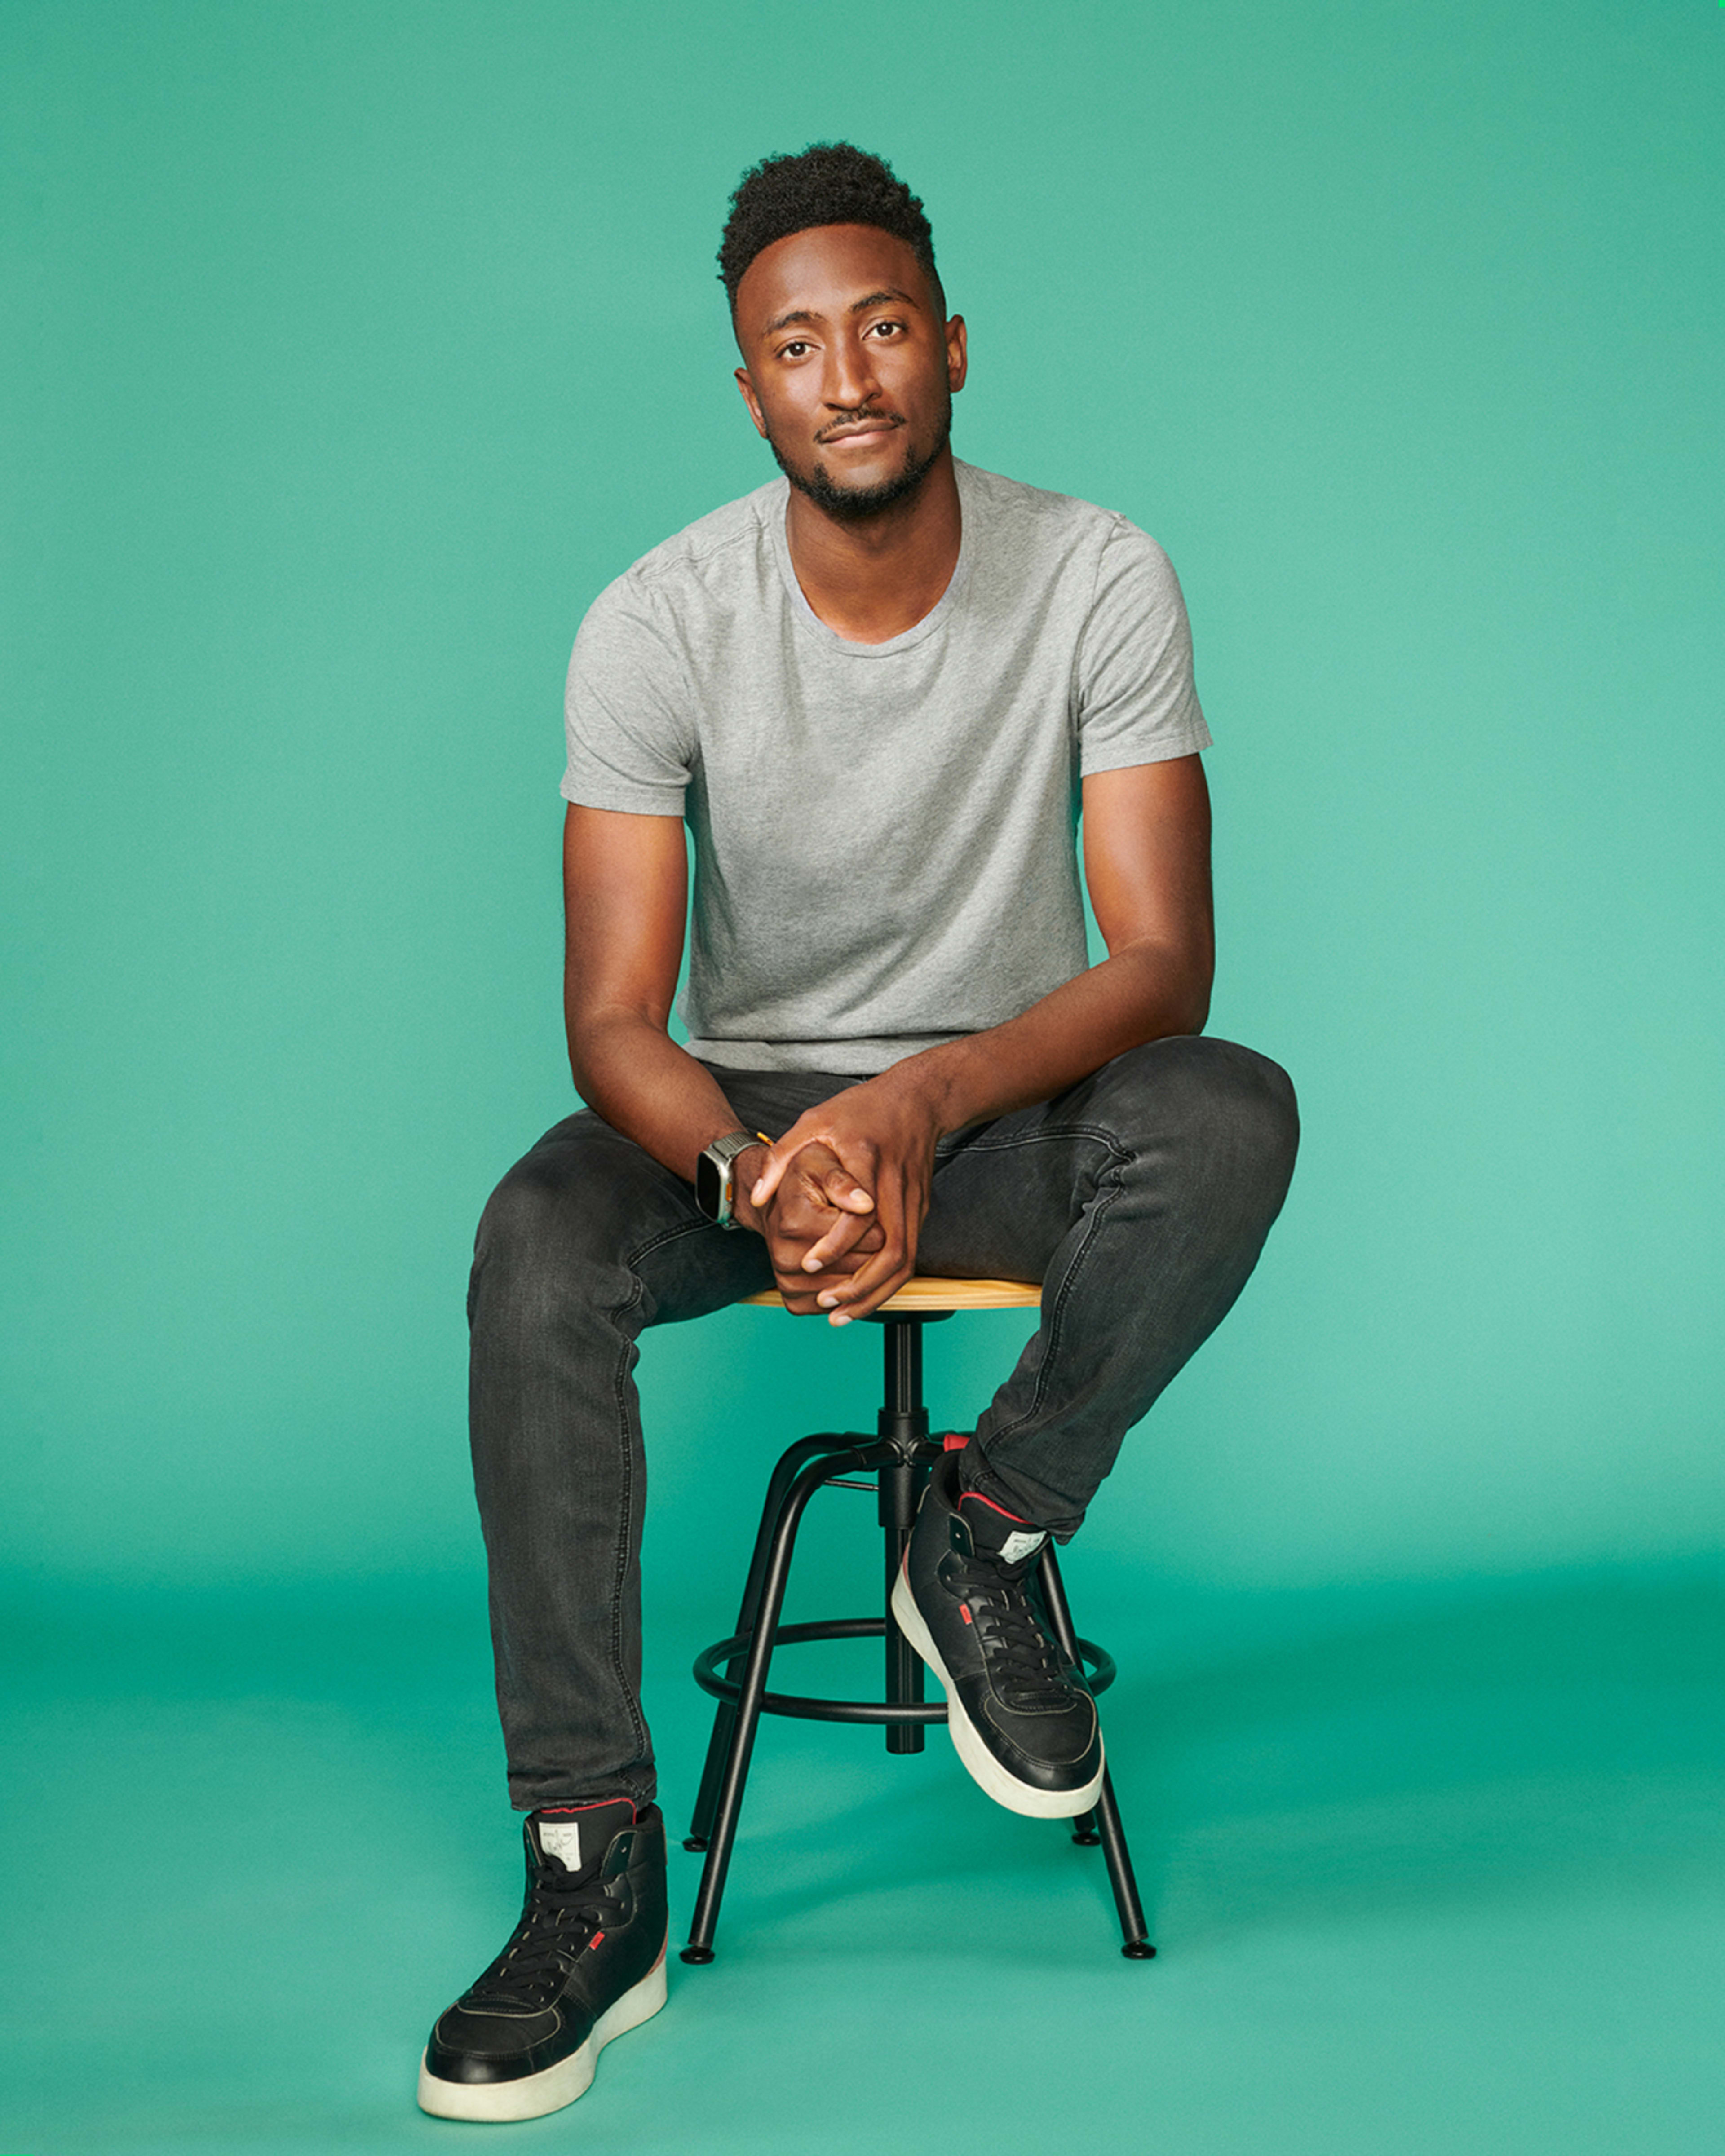 How Marques Brownlee became a YouTube tech star: A video timeline